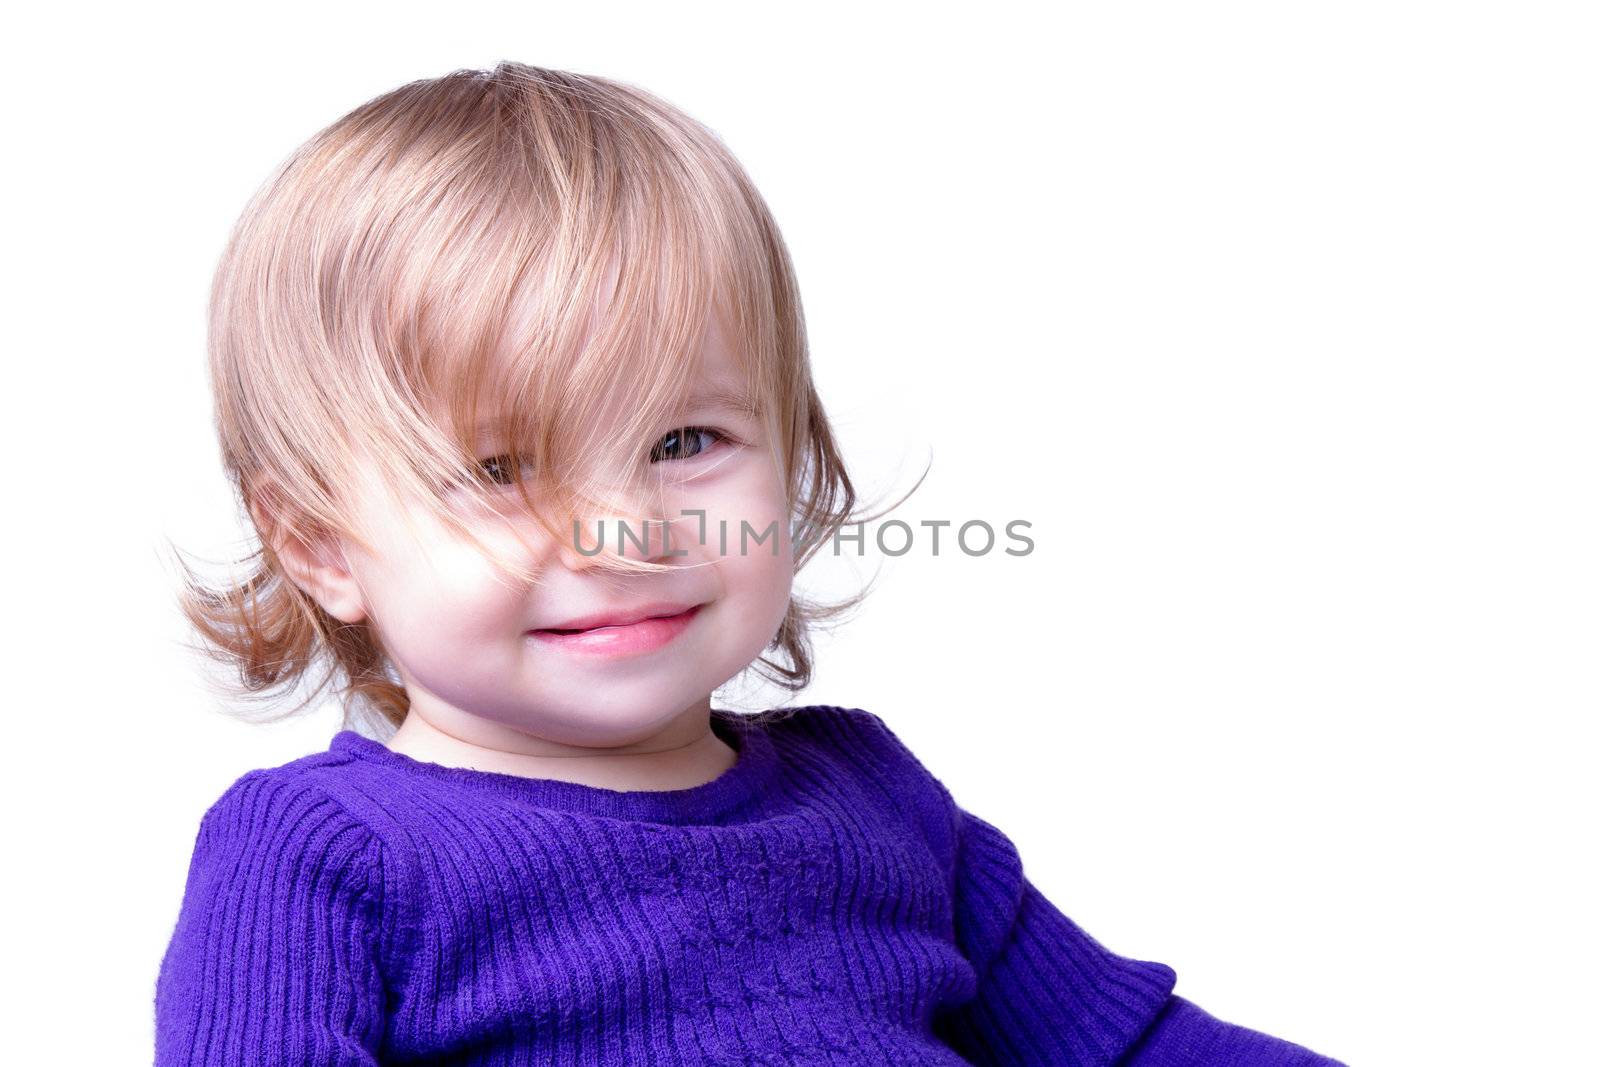 Little girl is smiling through her long never cut messy hair. Isolated on white background.